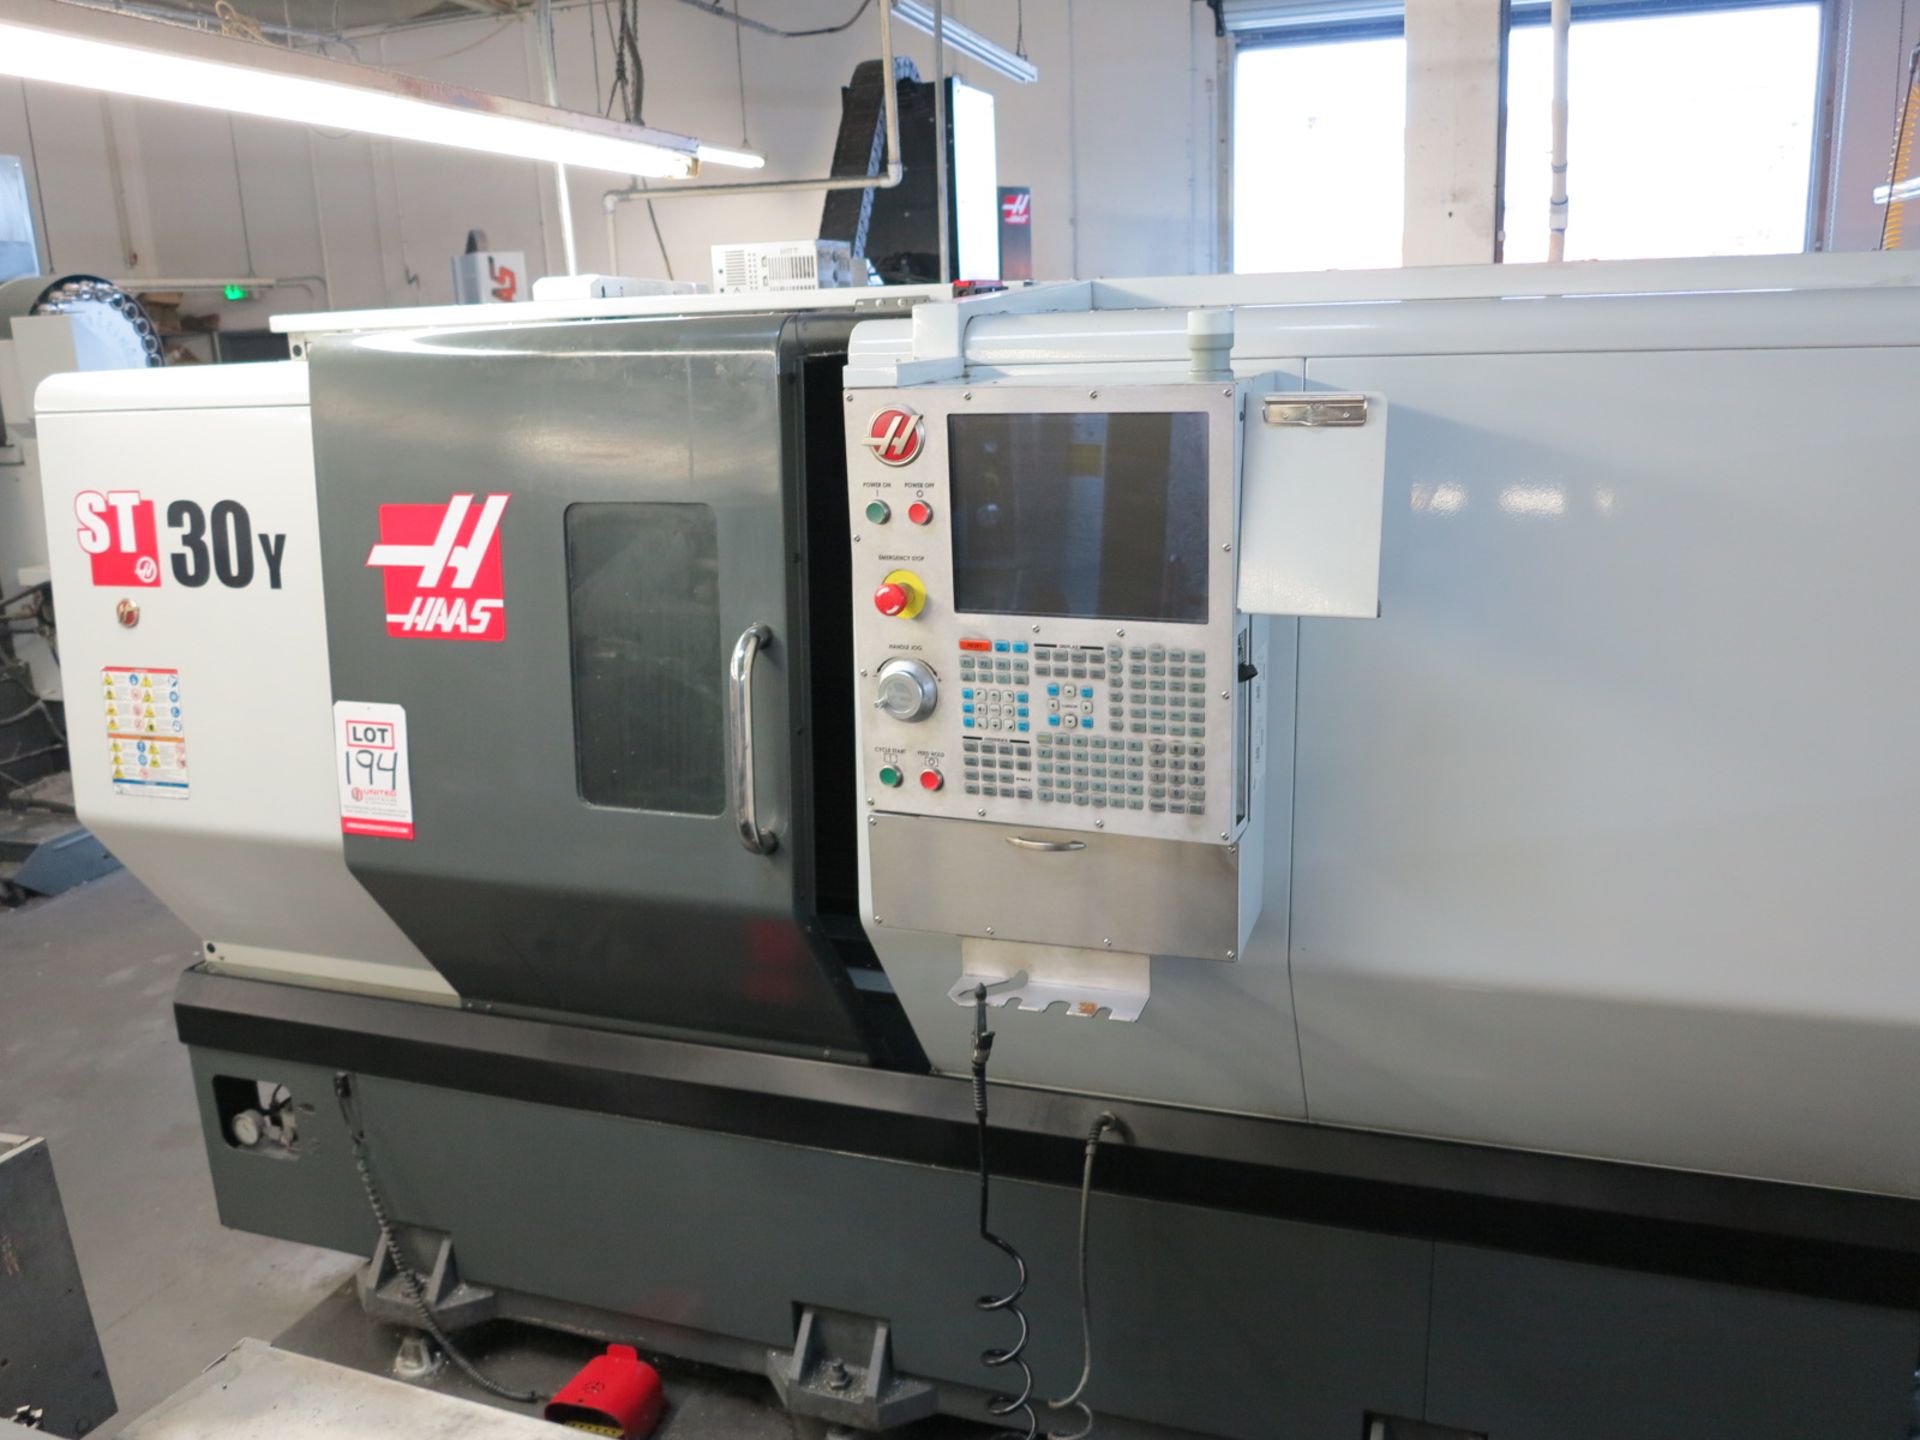 2013 HAAS ST-30Y CNC TURNING CENTER, S/N 3095014, FULL C AXIS, LIVE MILLING/DRILLING, Y AXIS - Image 4 of 14